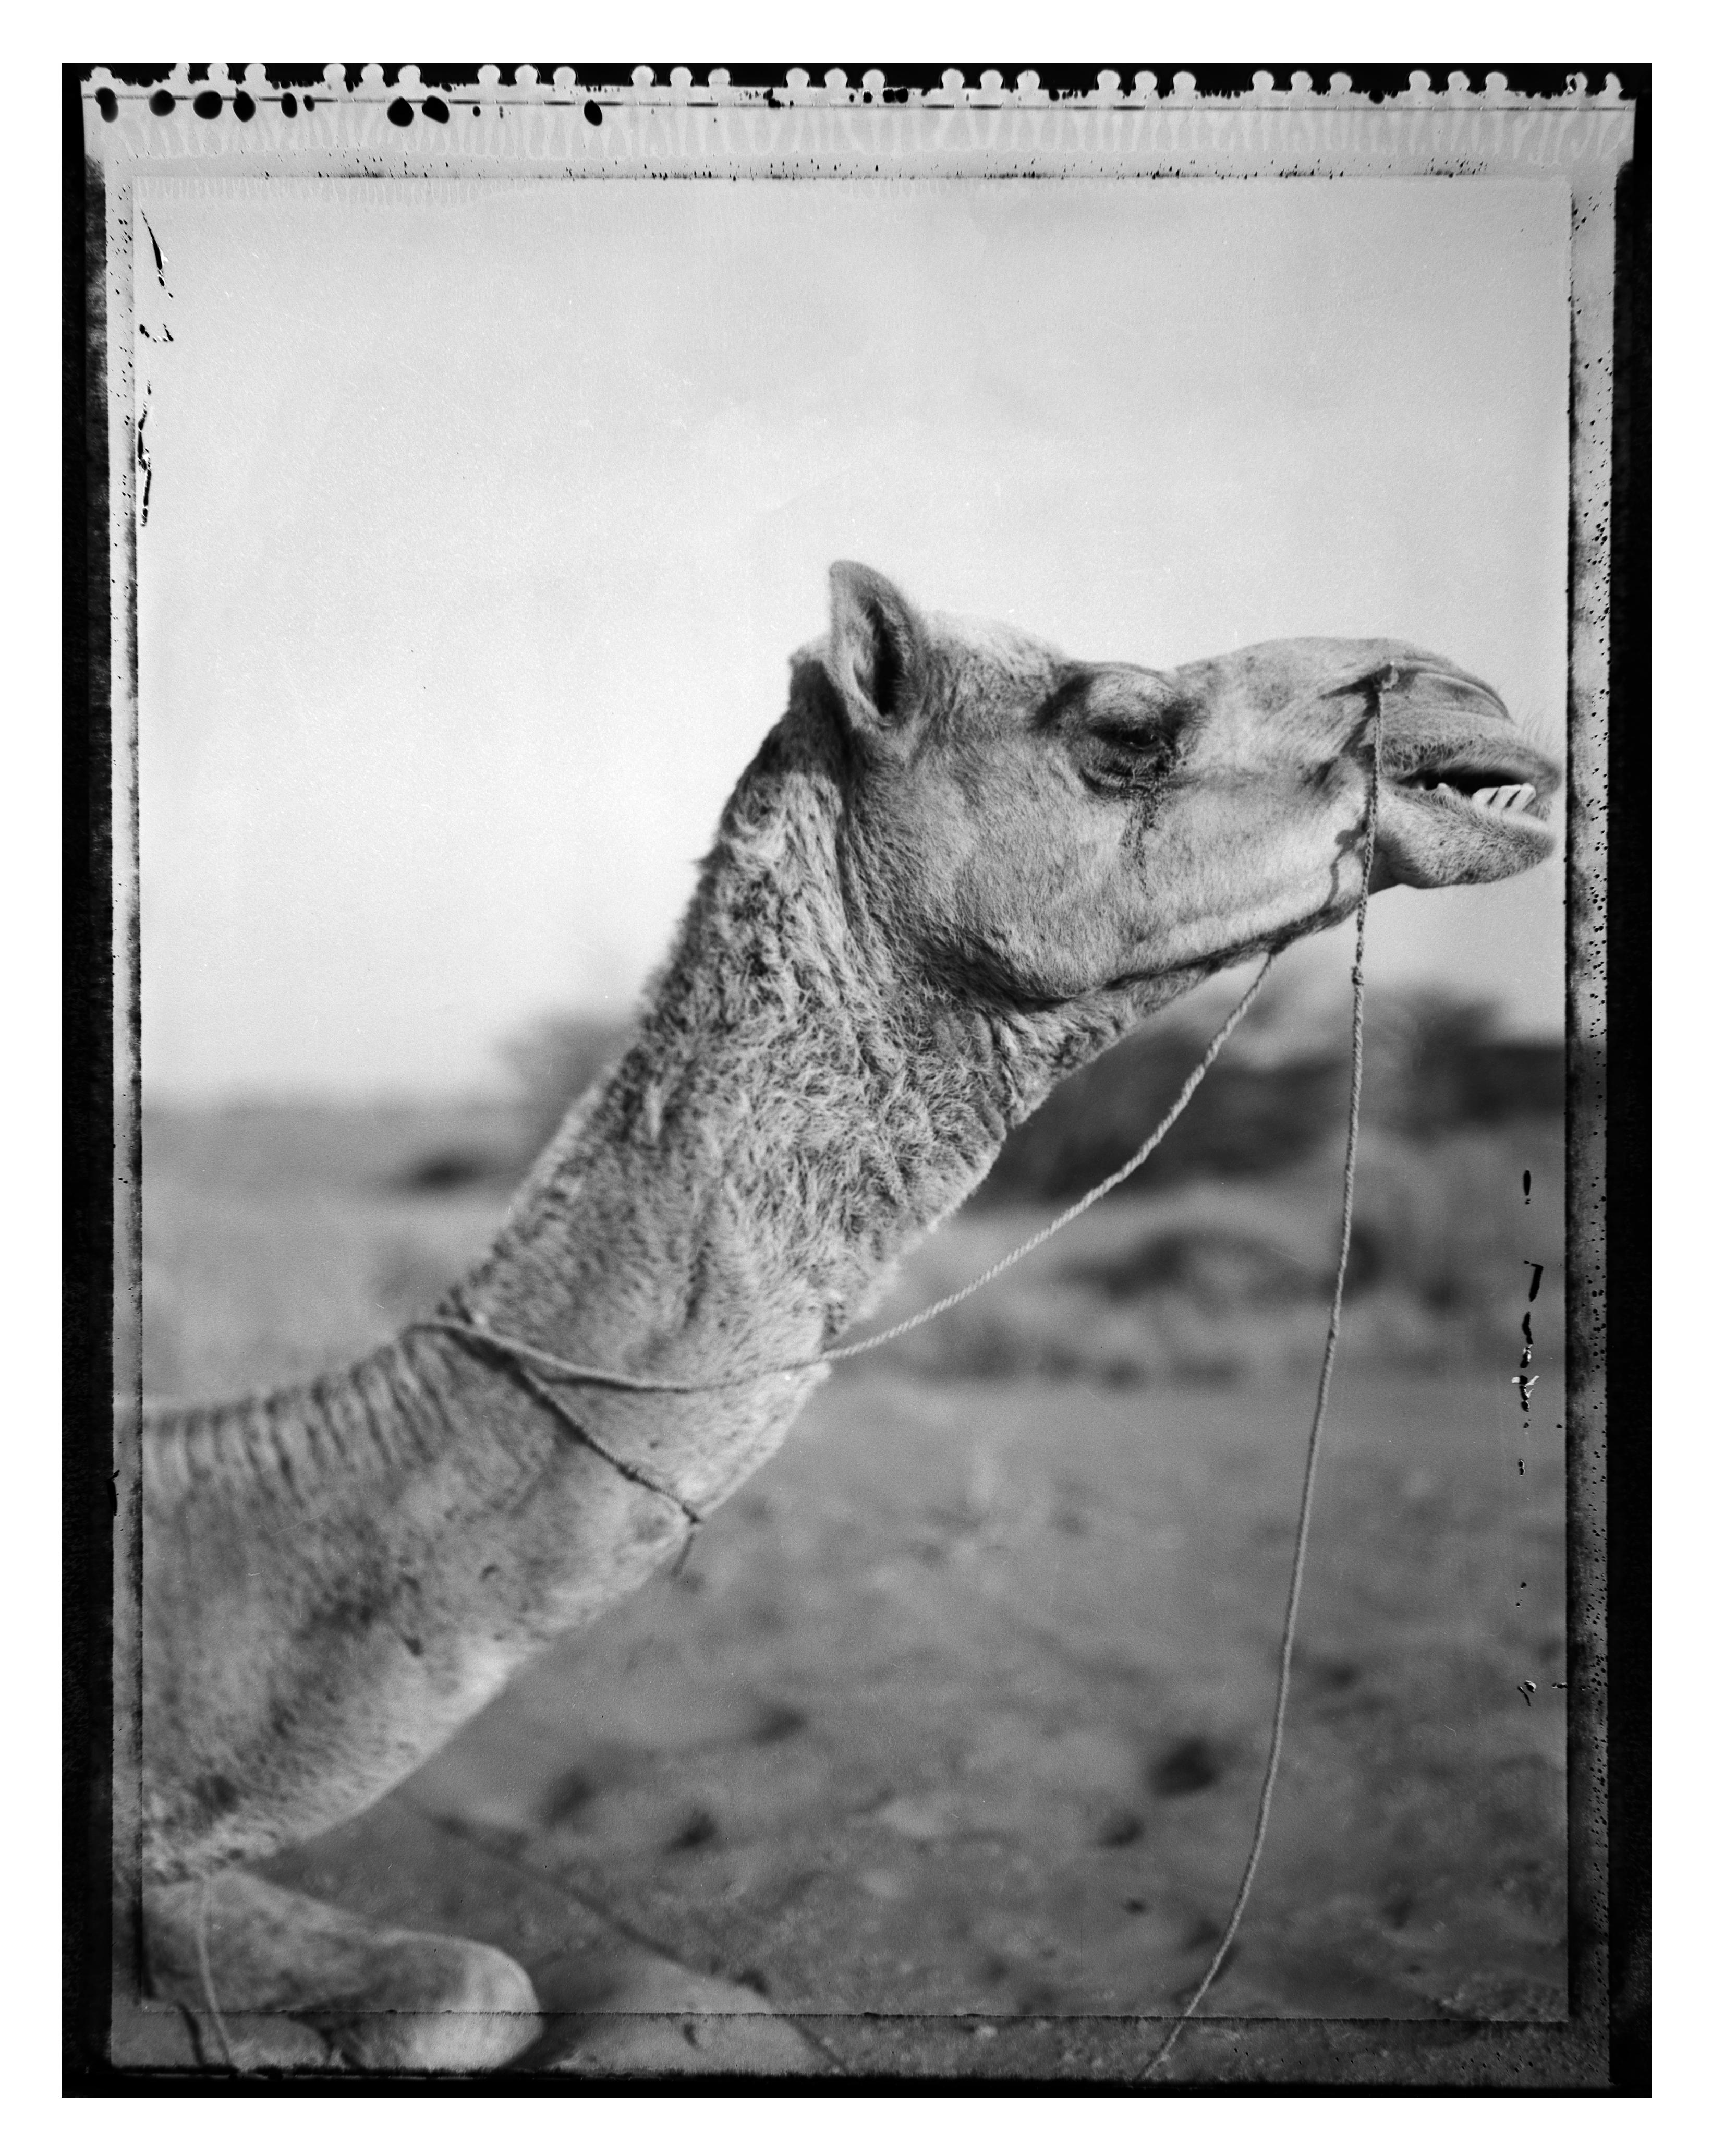 A Camel in Sand Dunes  - Rajastan -India (from Indian Stills series )